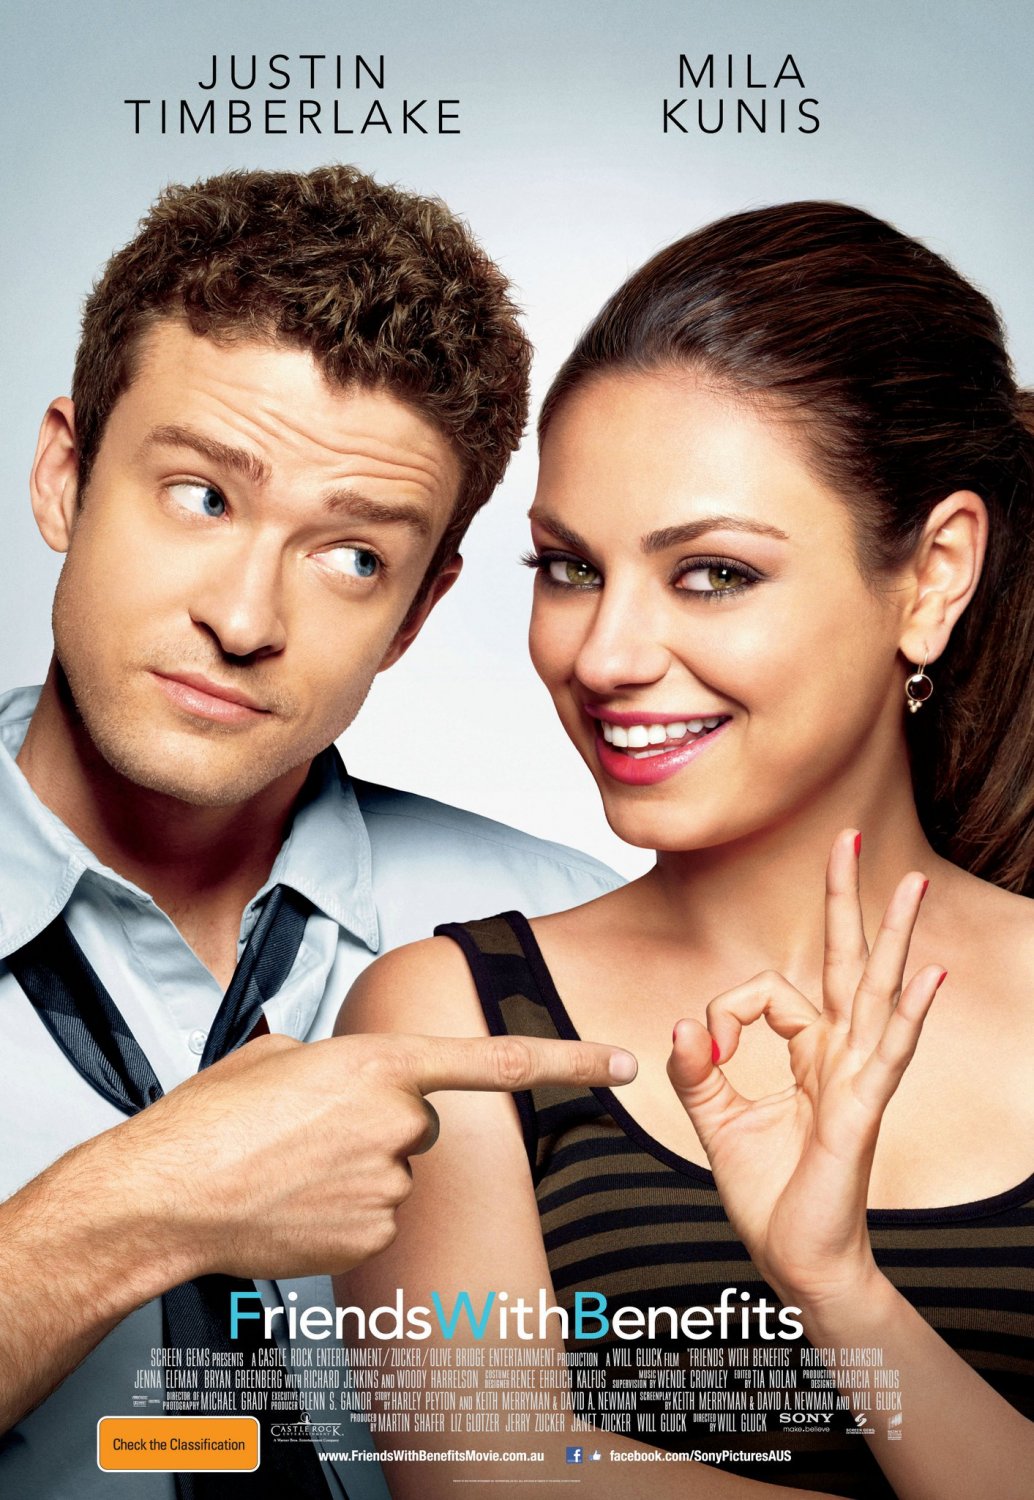 Mila Kunis in Friends With Benefits